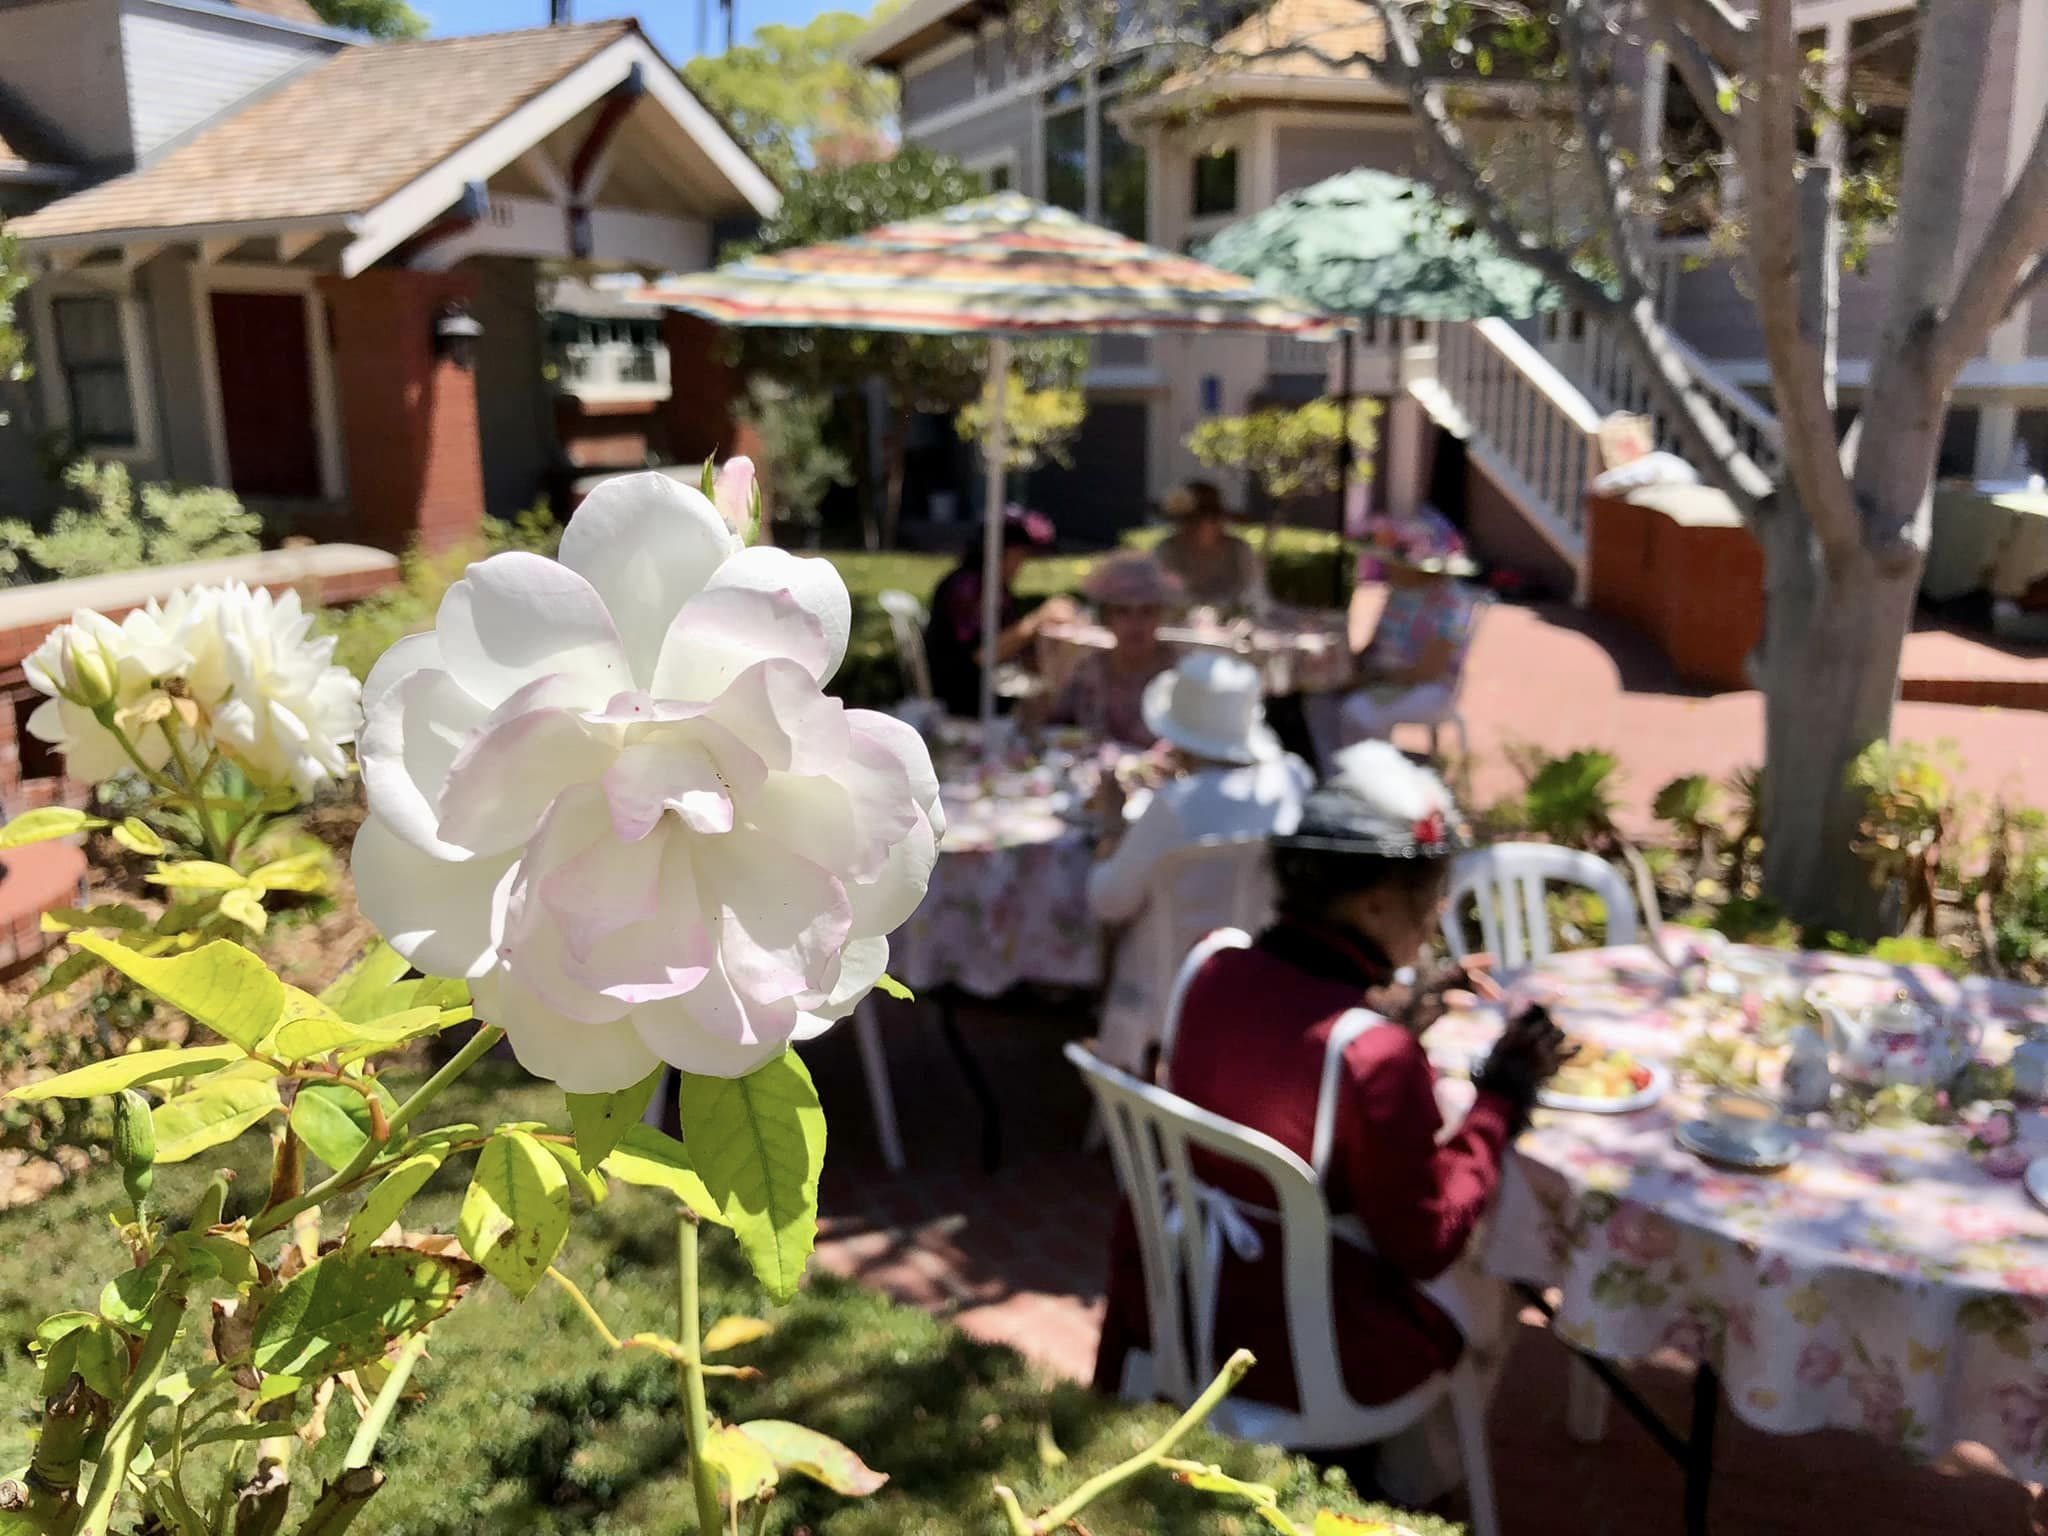 Close-up of a white flower in focus with blurred background of people enjoying tea at outdoor tables in Heritage Square, surrounded by greenery and quaint houses.